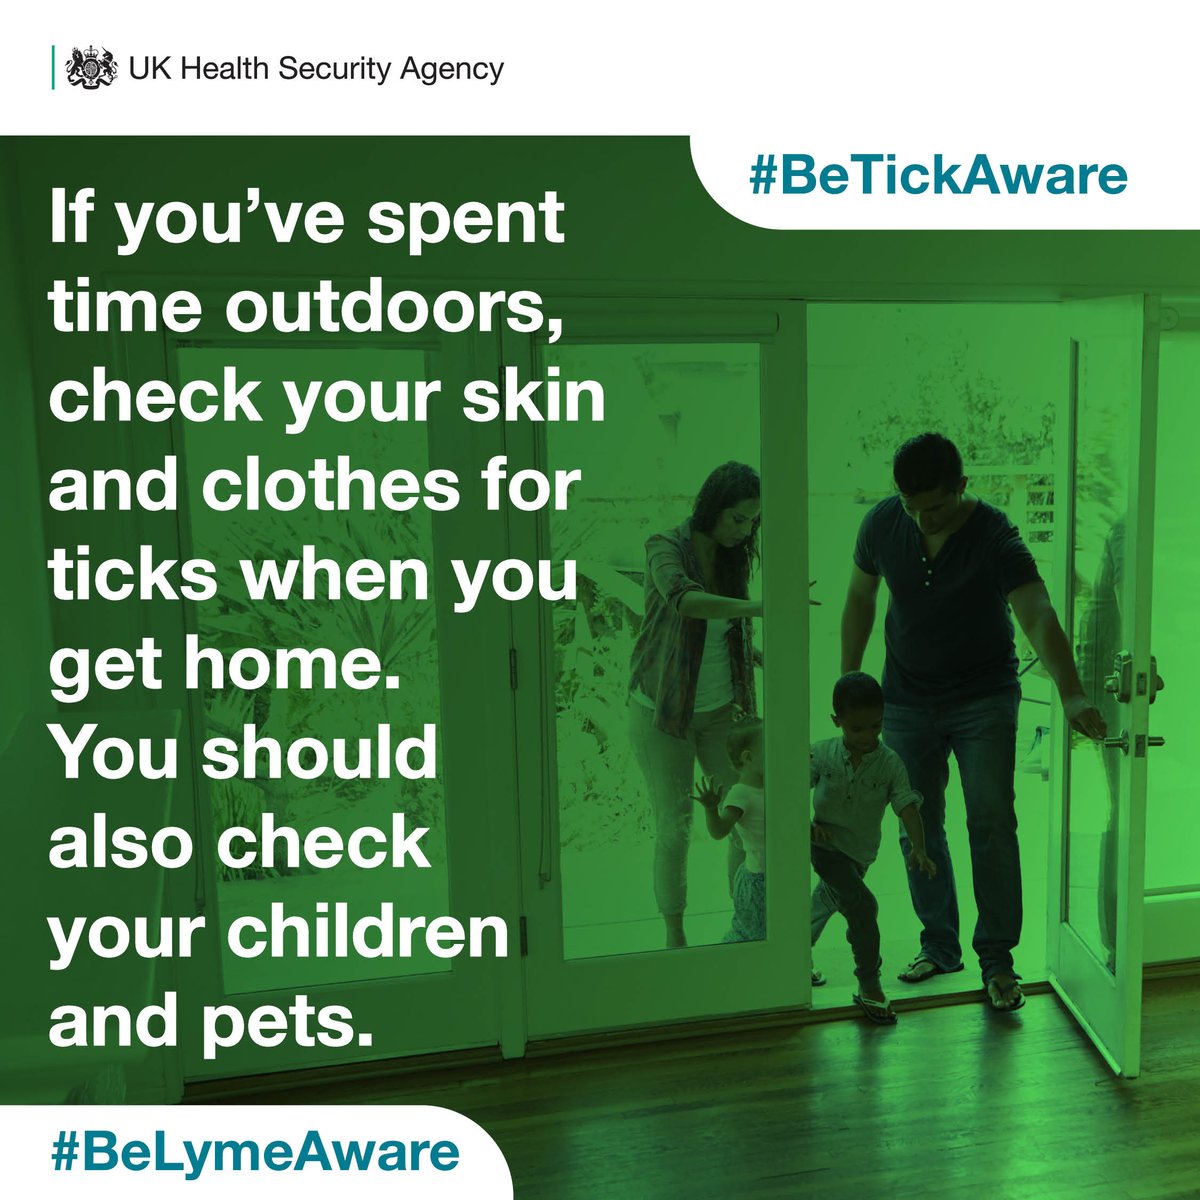 If you've spent time outdoors, check your skin and clothes for ticks when you get home. You should also check your children and pets. 

#BeTickAware #BeLymeAware